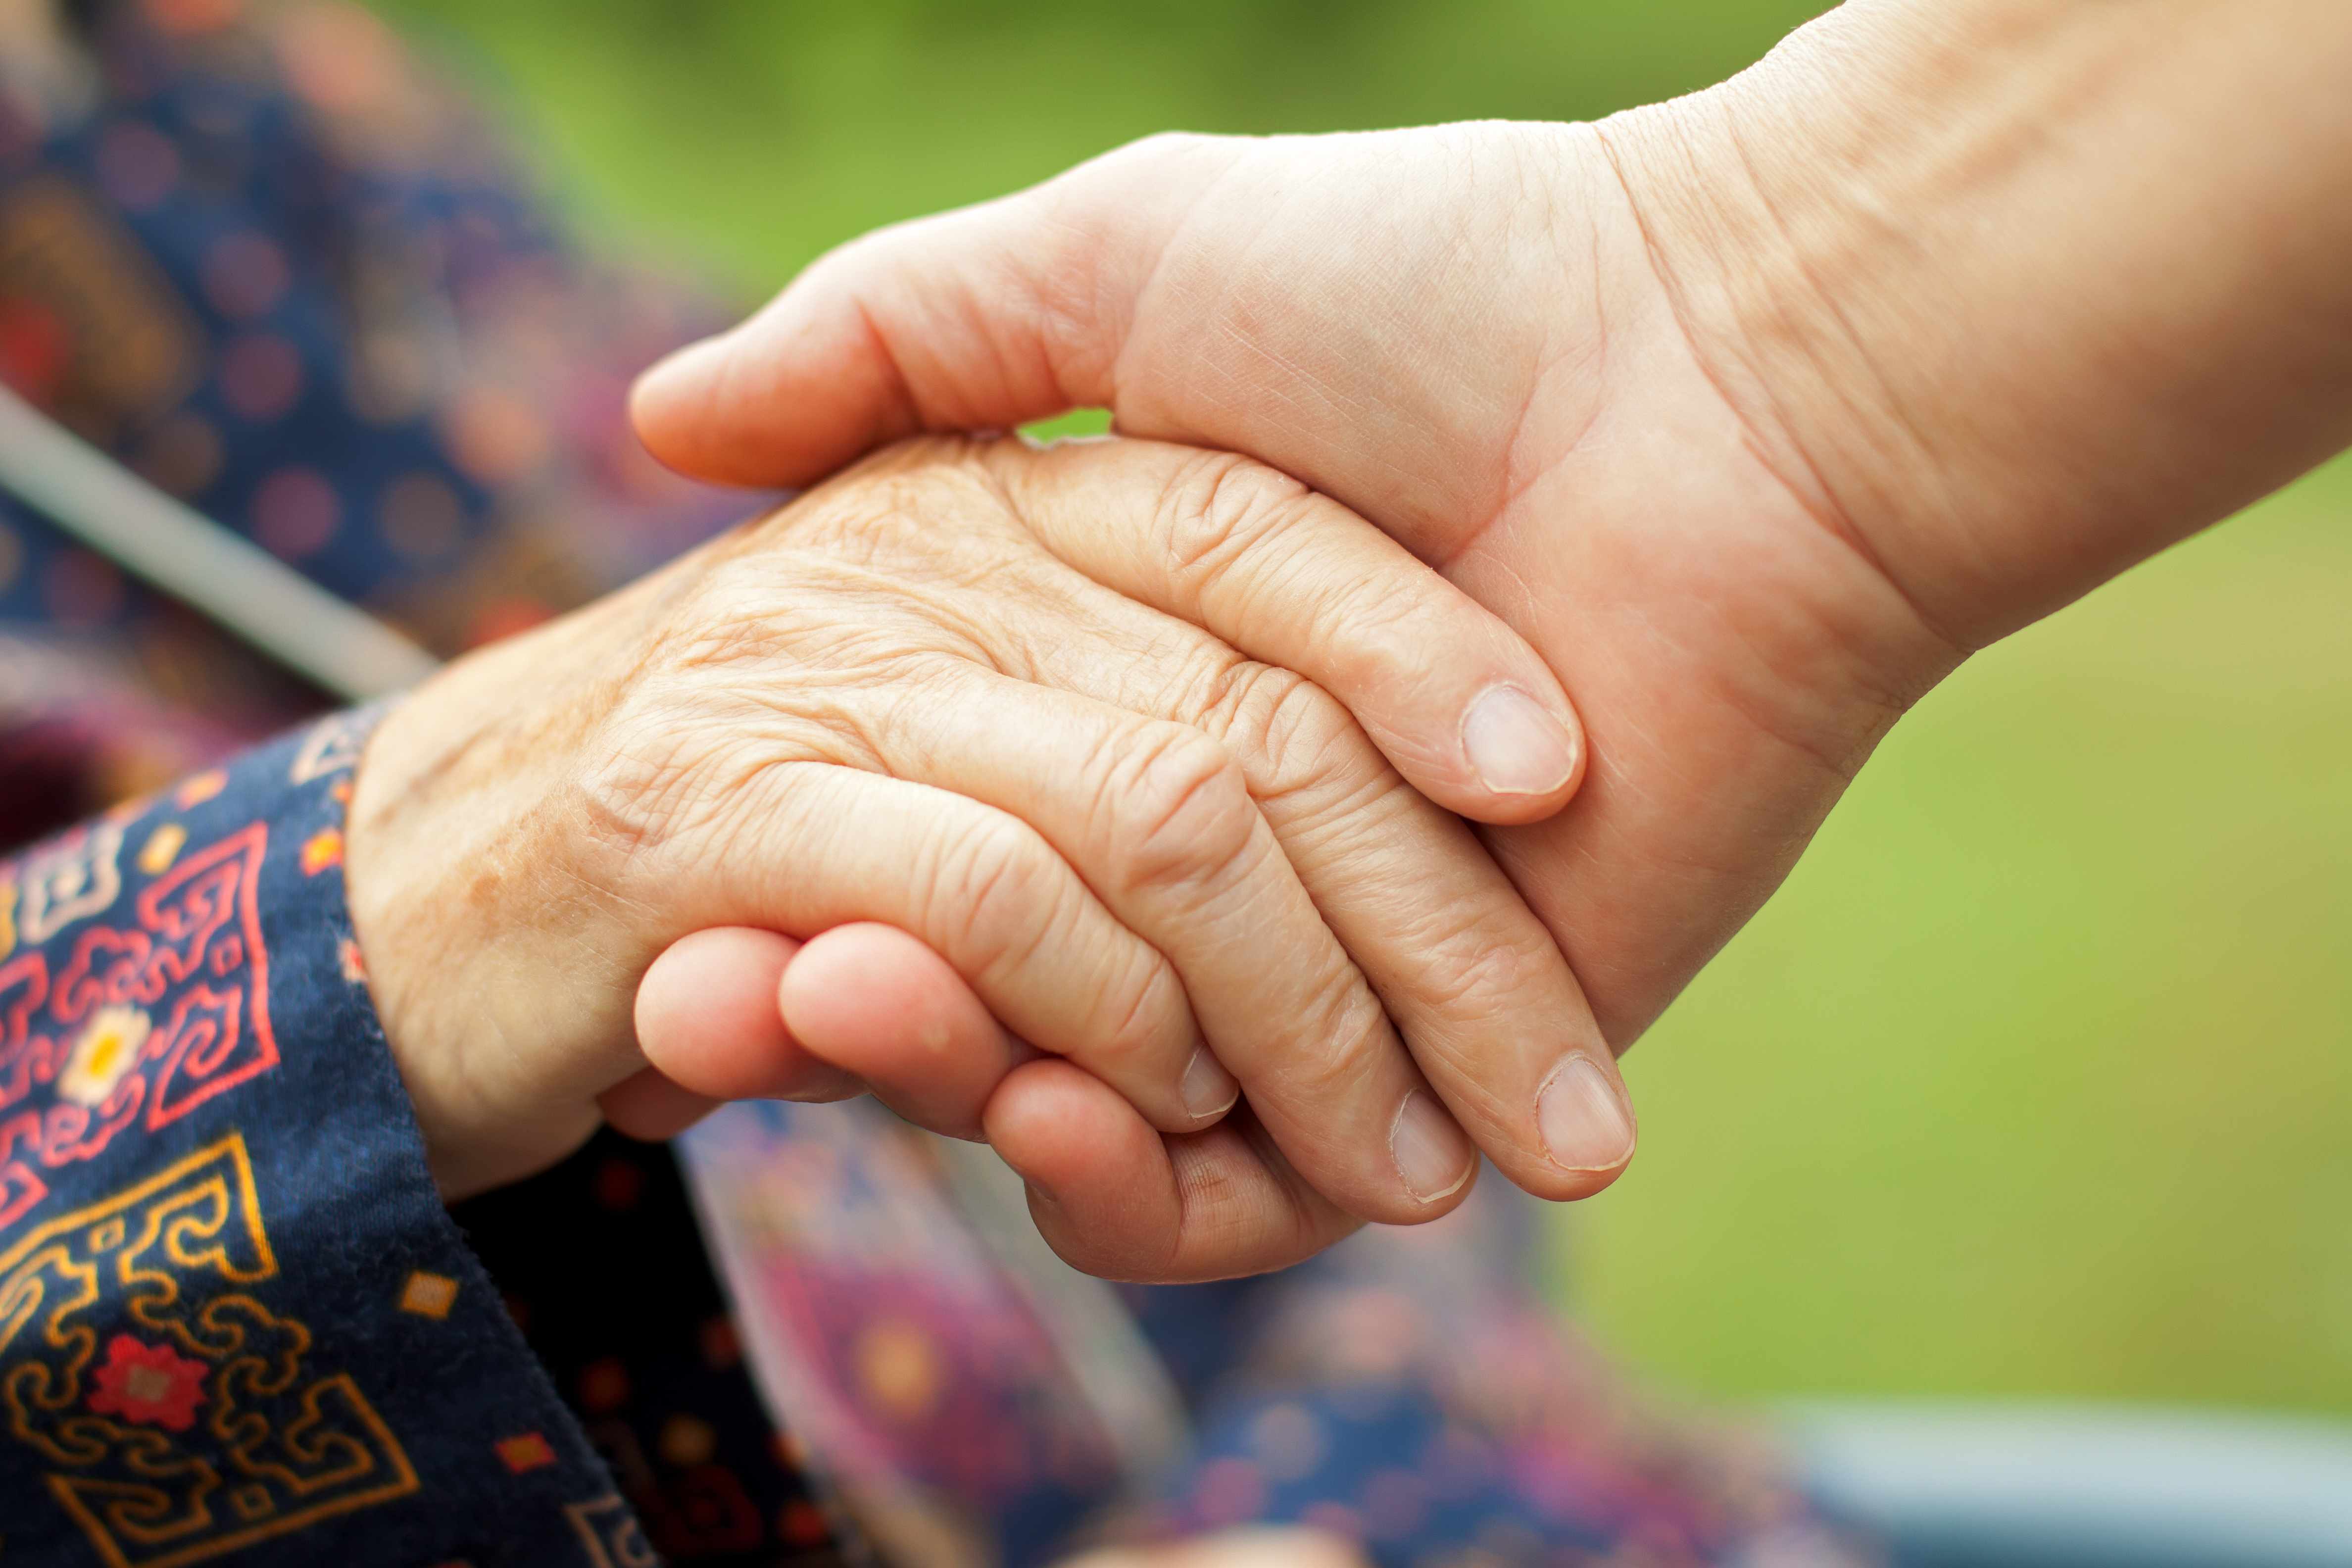 a caregiver holding the hand of an elderly person, senior citizen with arthritis, maybe Parkinson's disease